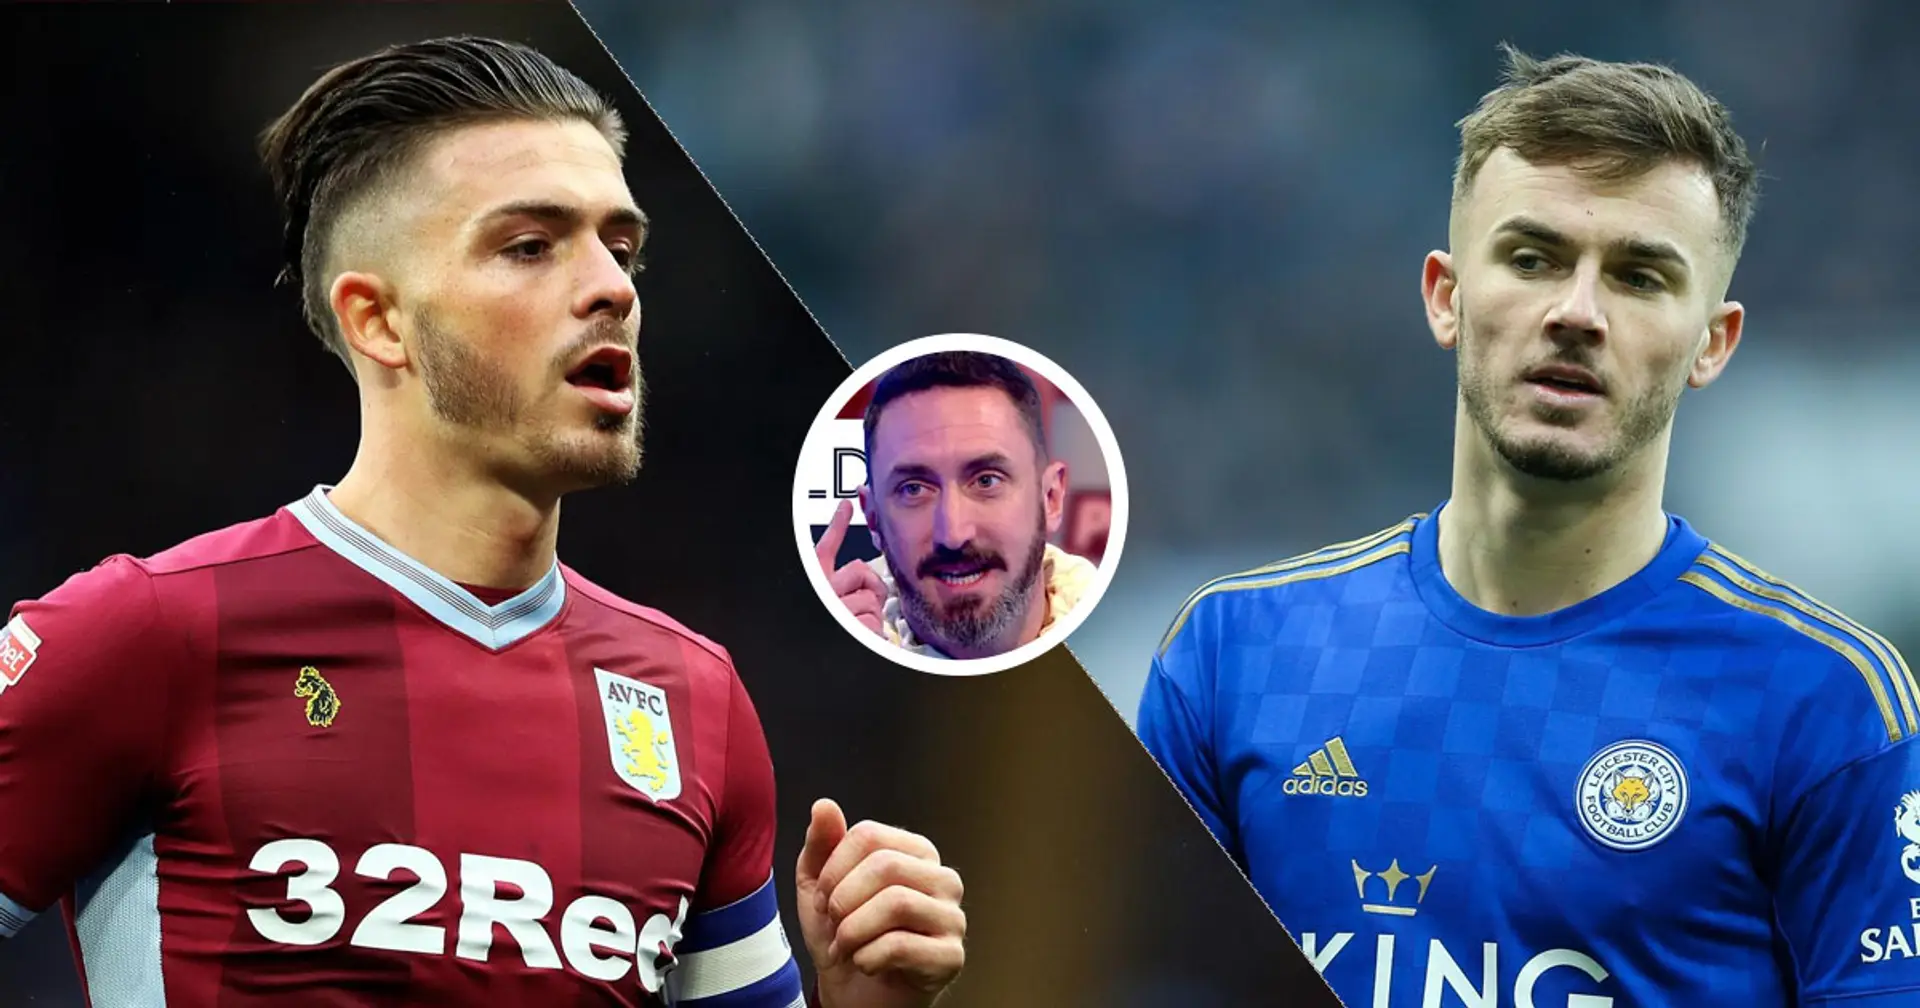 ‘He’ll bring something different’: Solskjaer urged to sign Grealish over Maddison by former teammate